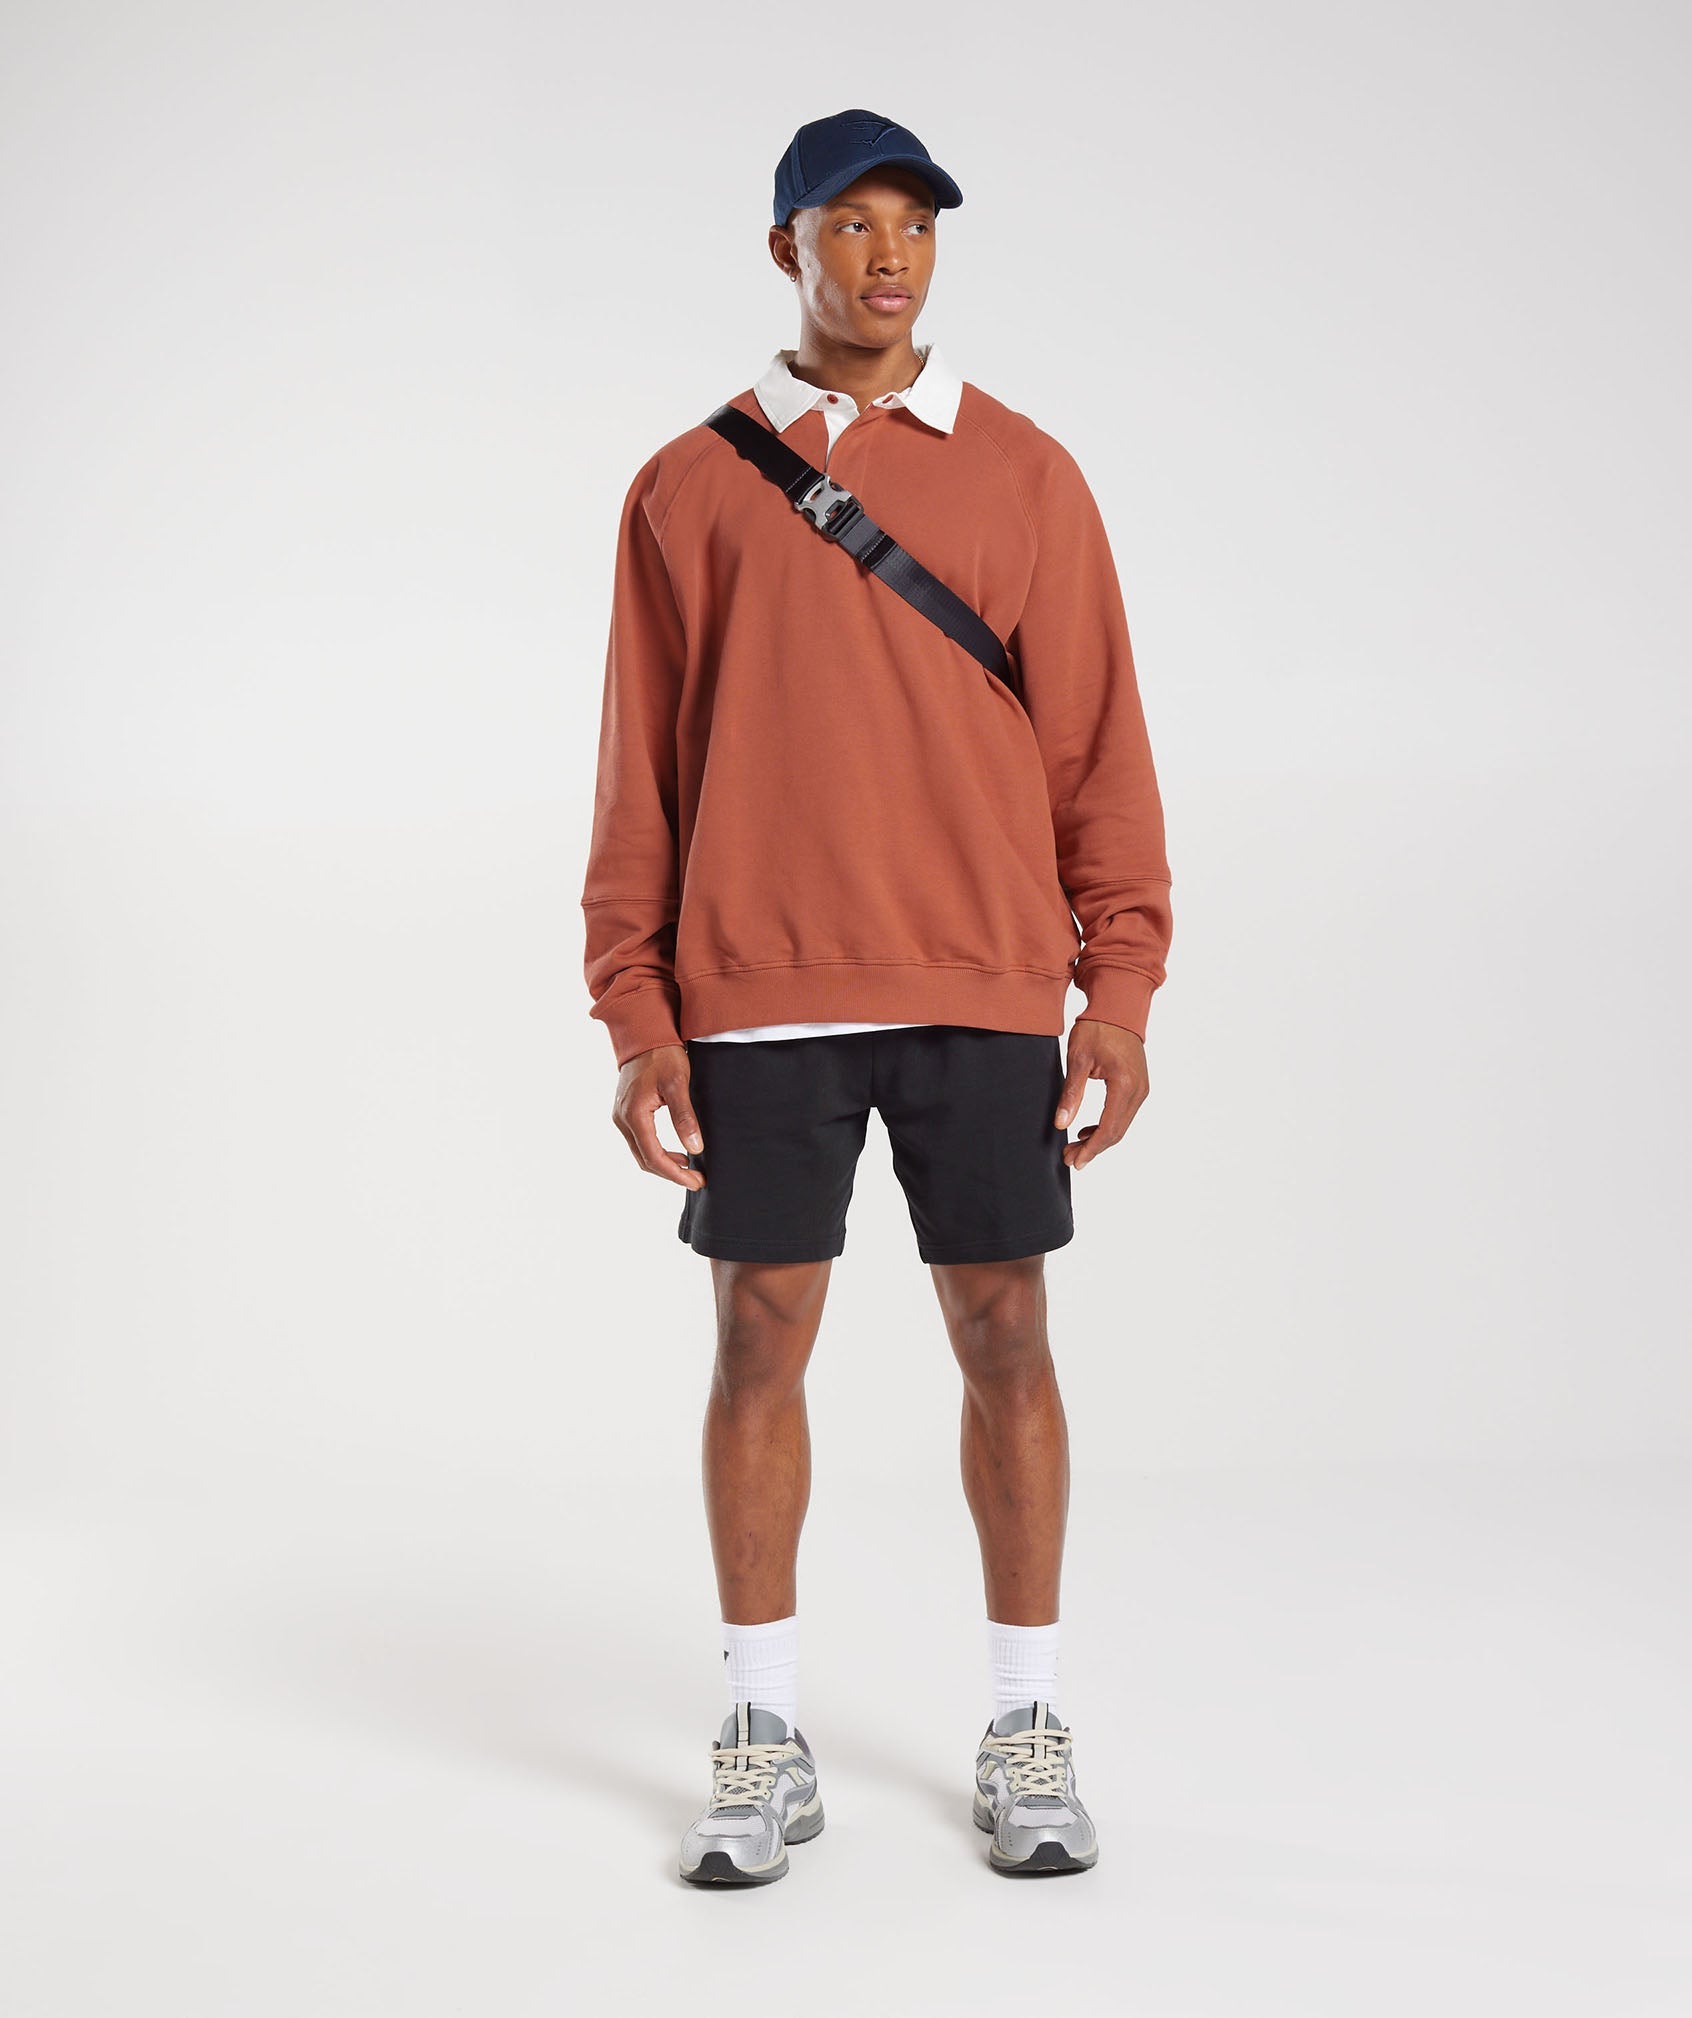 Rest Day Essentials Sweat Polo in Persimmon Red - view 4